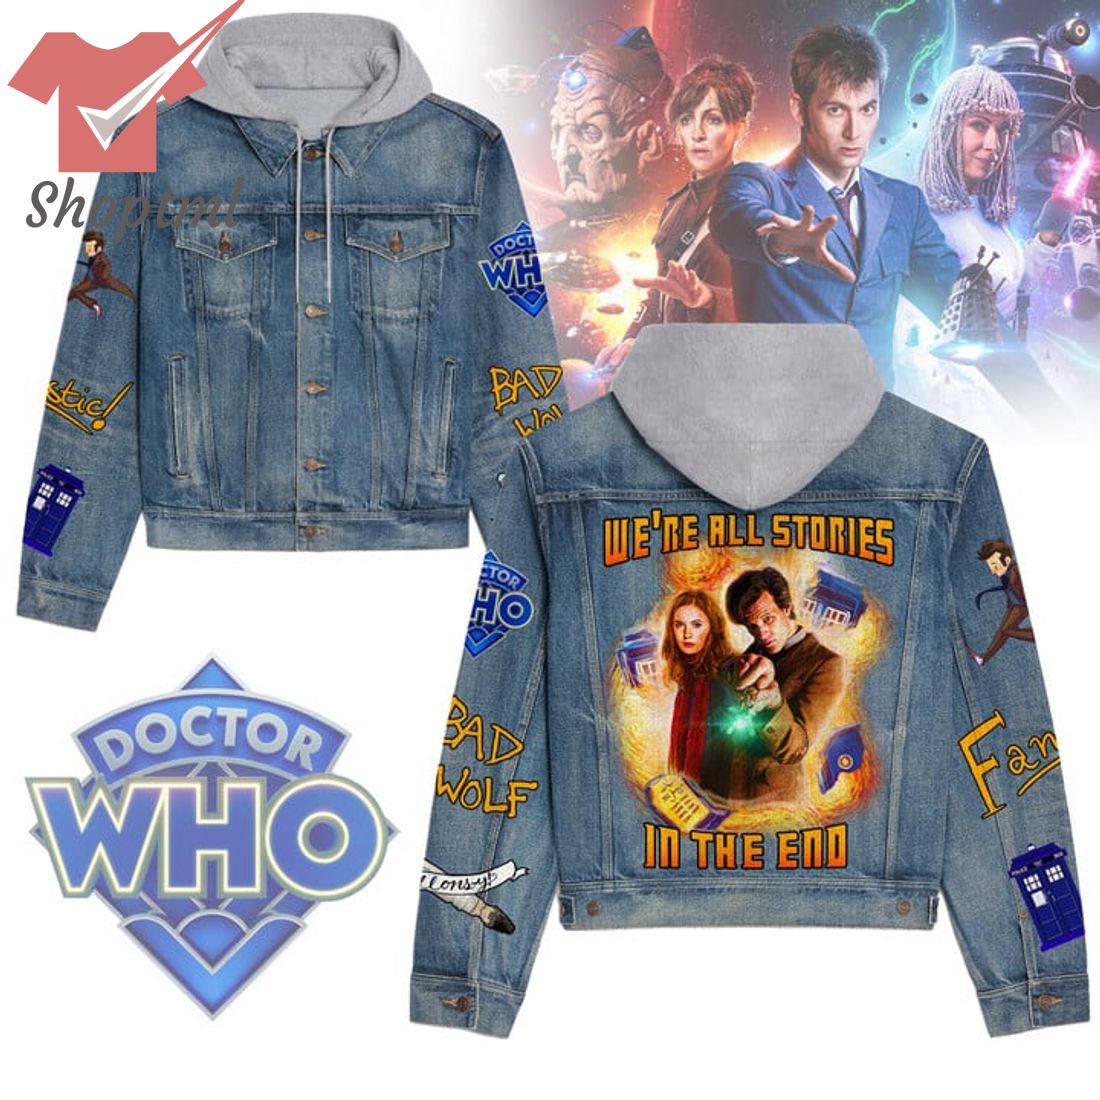 Doctor Who We're All Stories In The End Hooded Denim Jacket